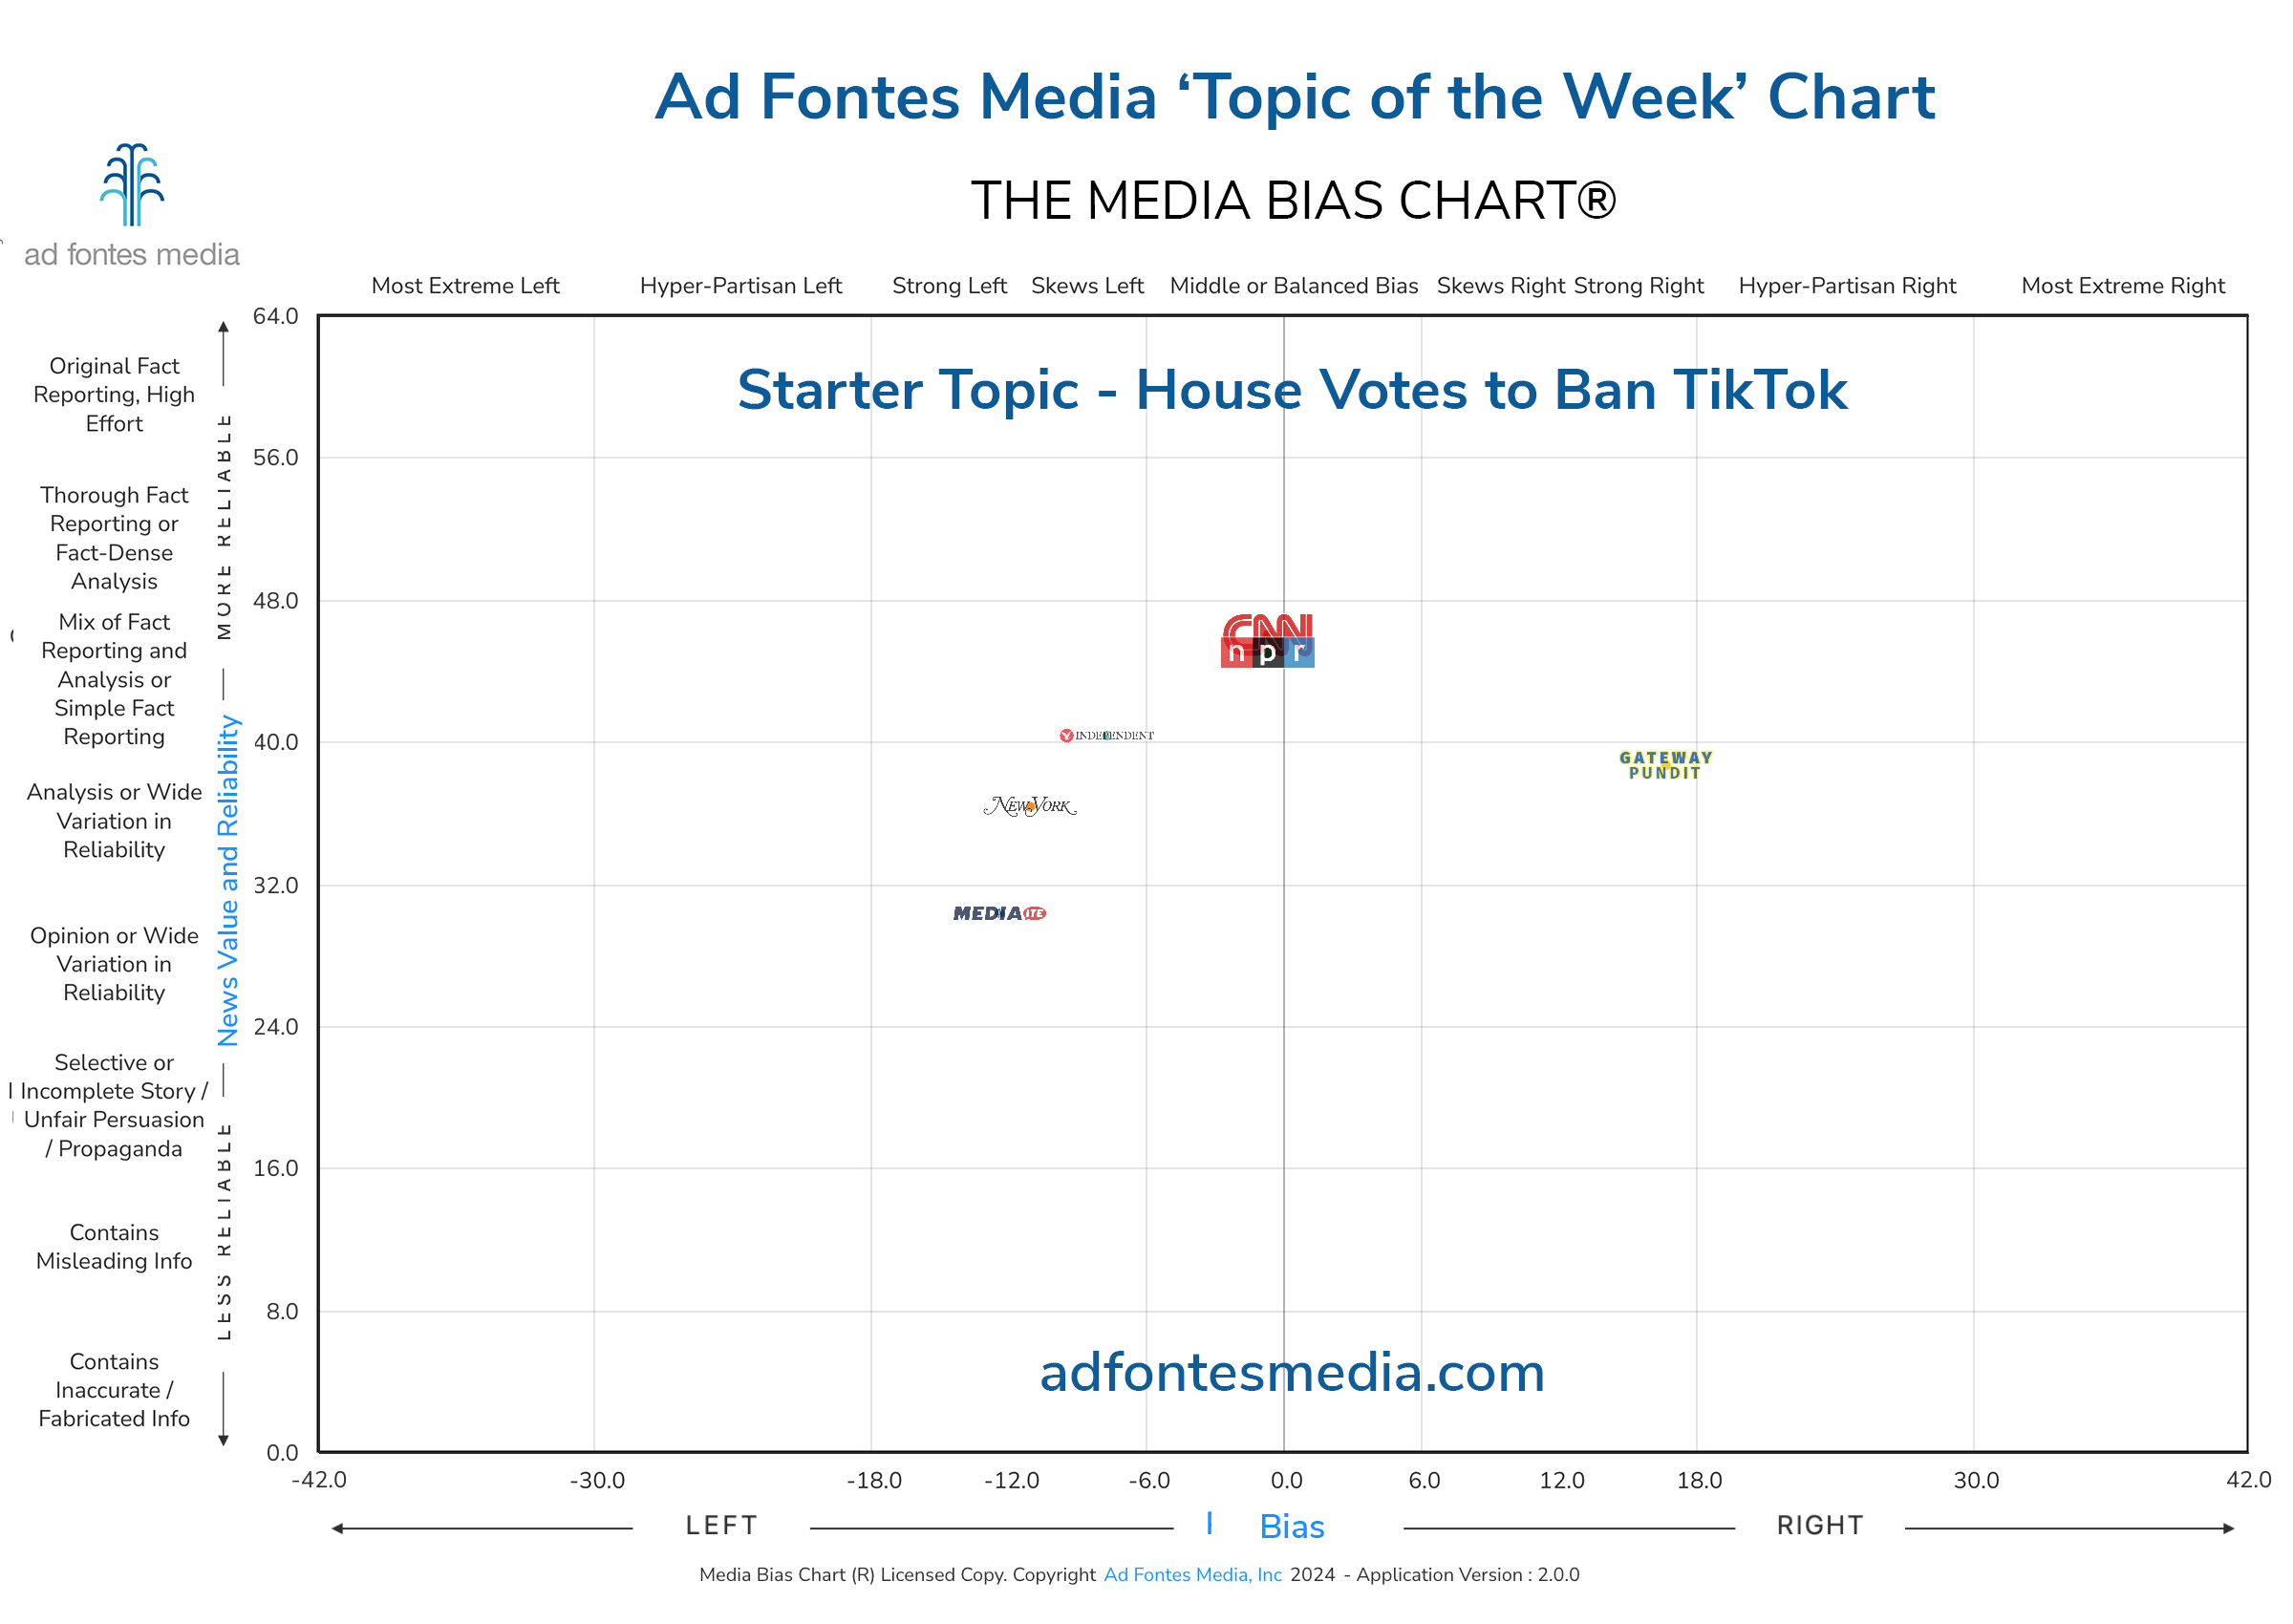 The Media Bias Chart takes a look at articles covering the House vote that could ban social media platform TikTok